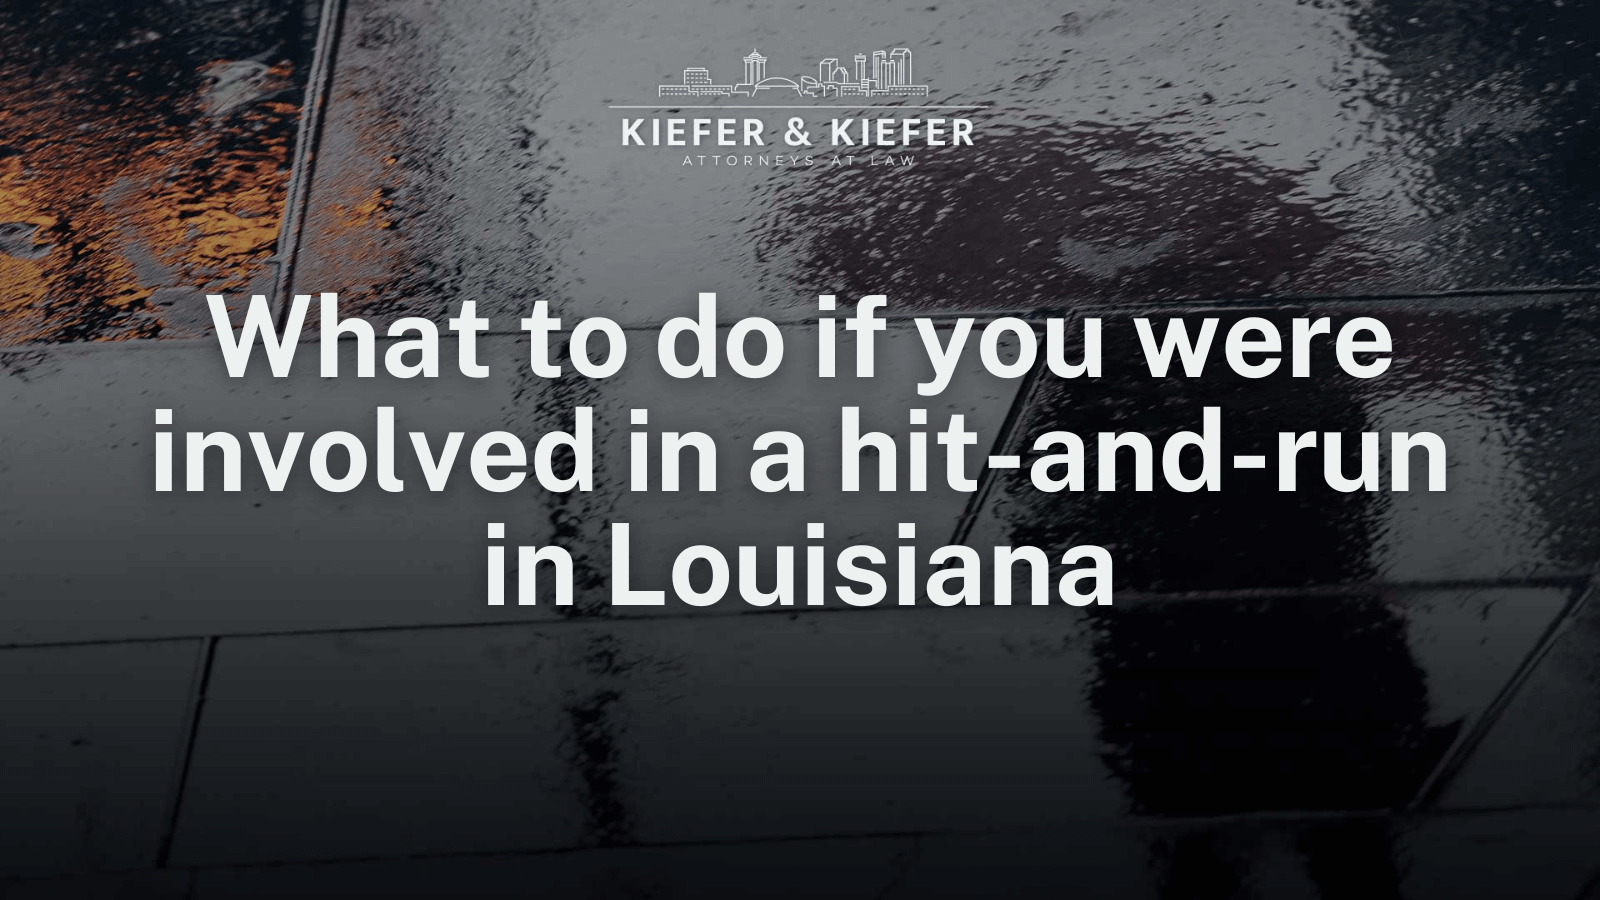 What to do if you were involved in a hit-and-run in Louisiana - Kiefer & Kiefer New Orleans Personal Injury Attorneys